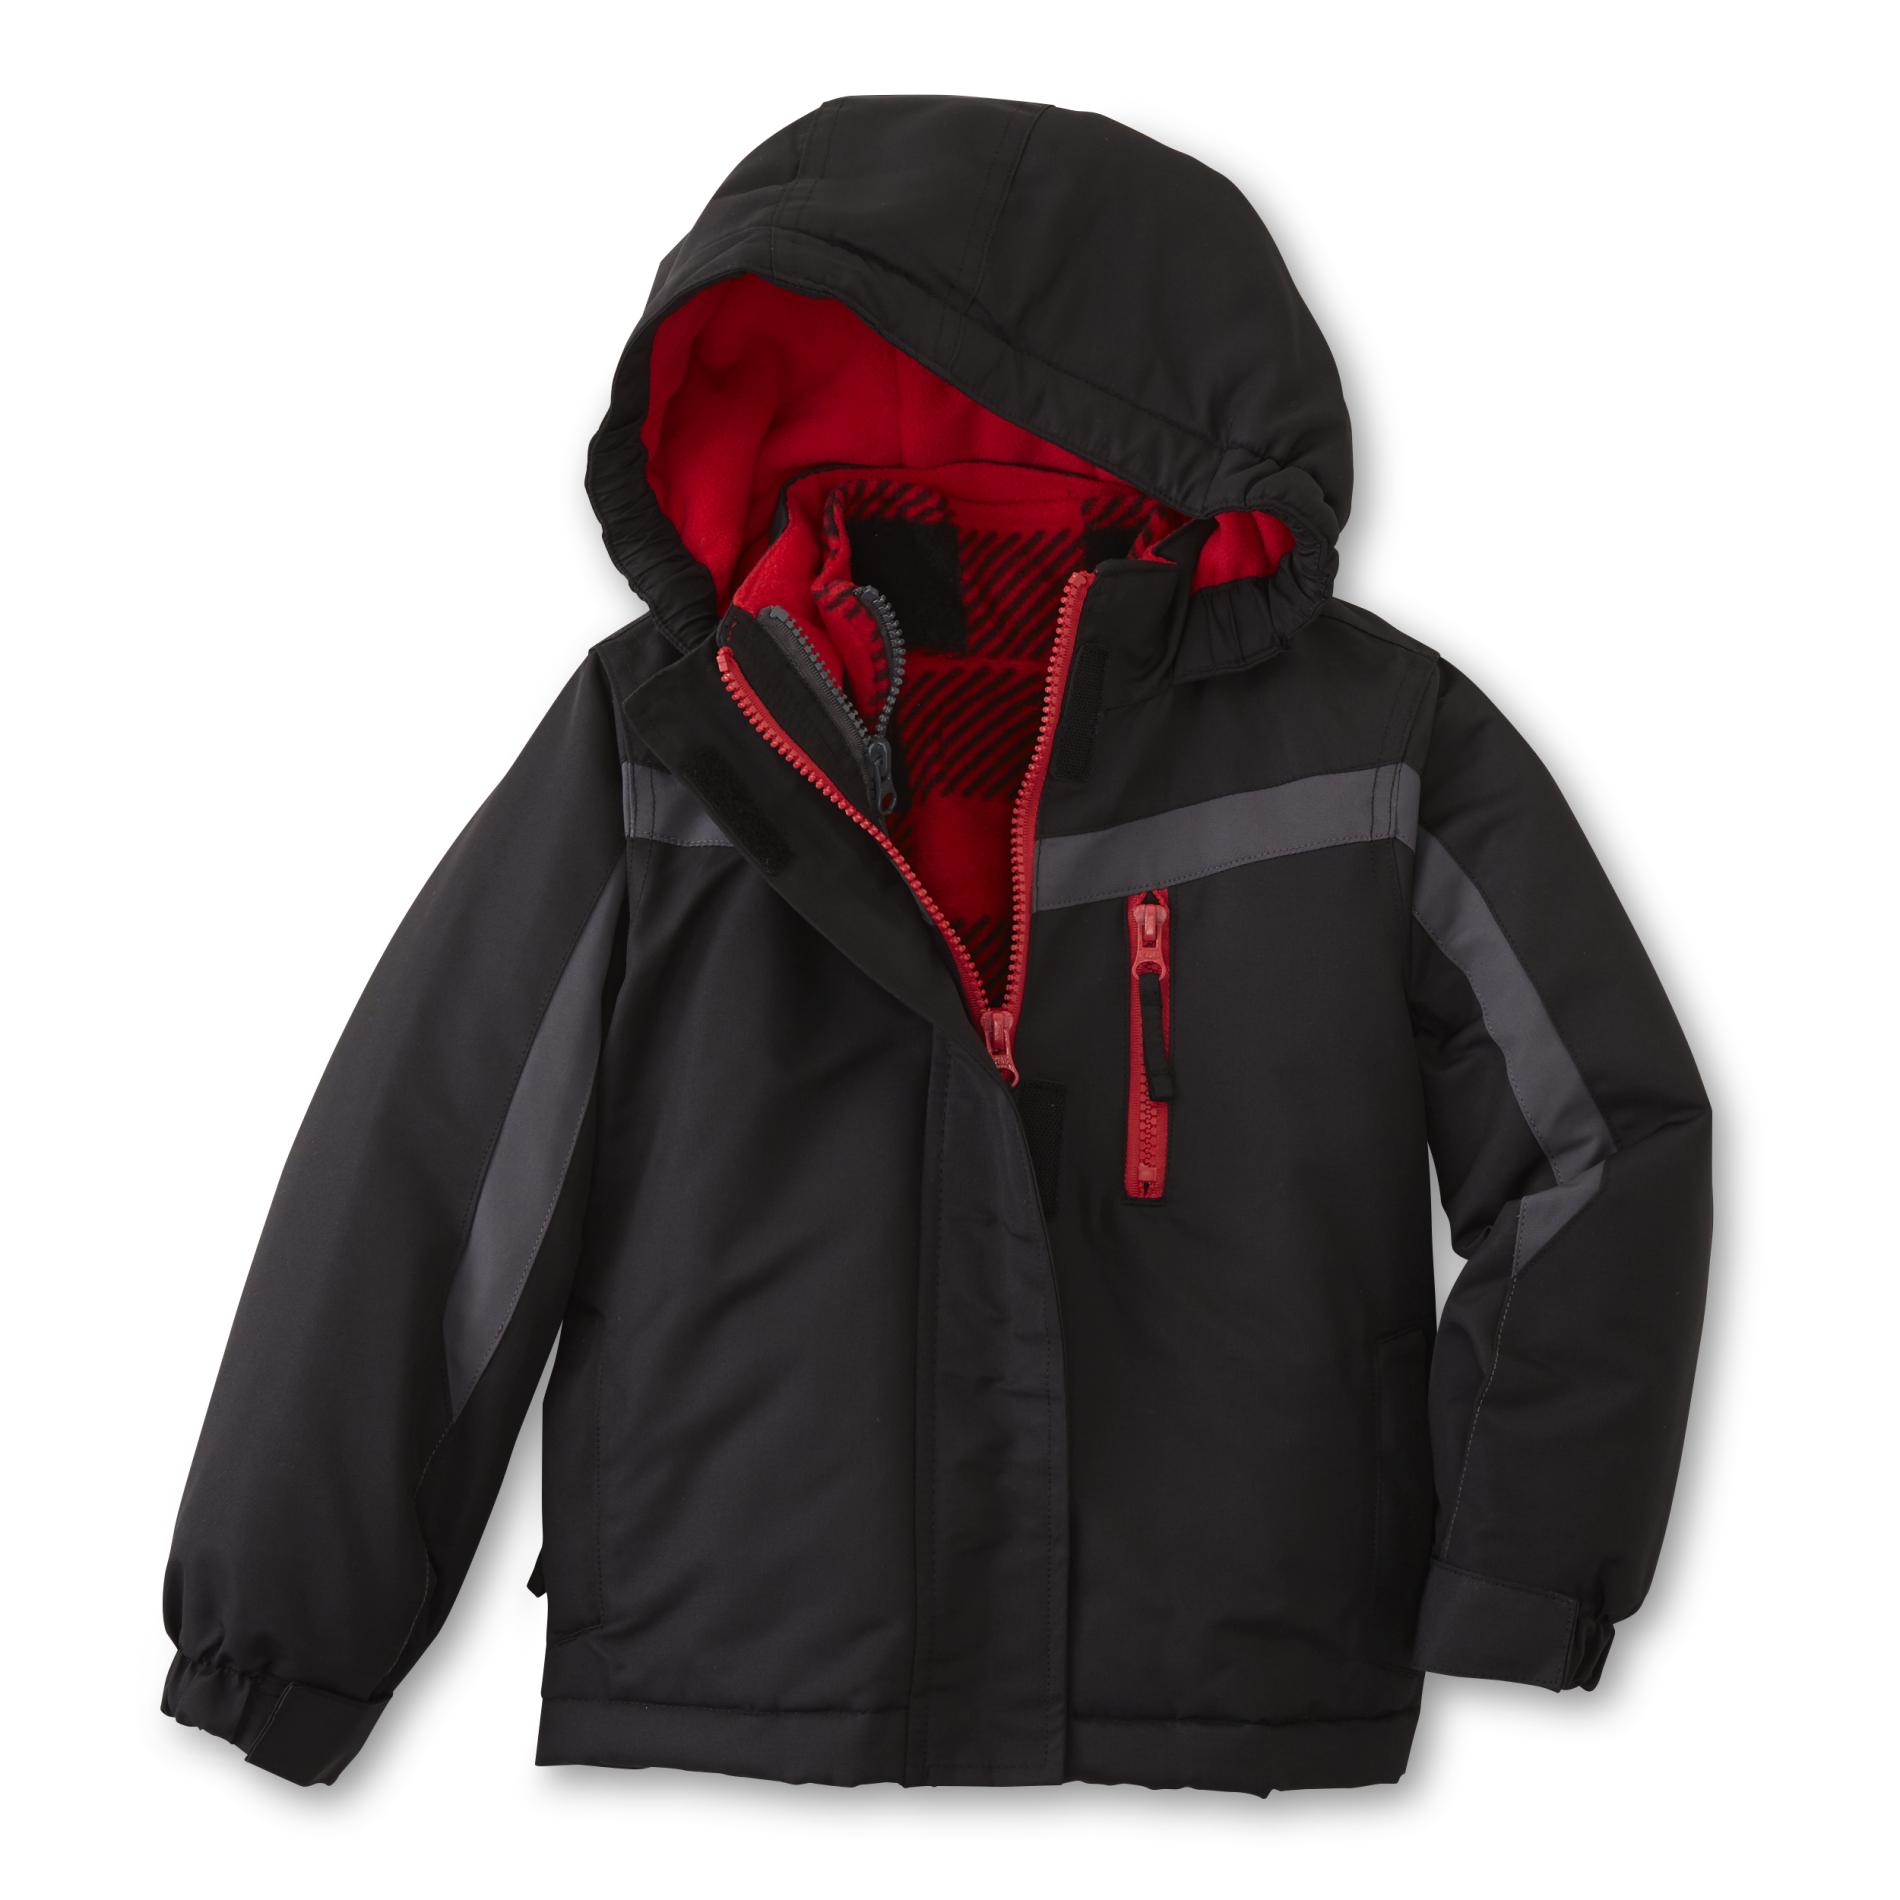 Athletech Infant & Toddler Boys' 3-in-1 Jacket - Colorblock